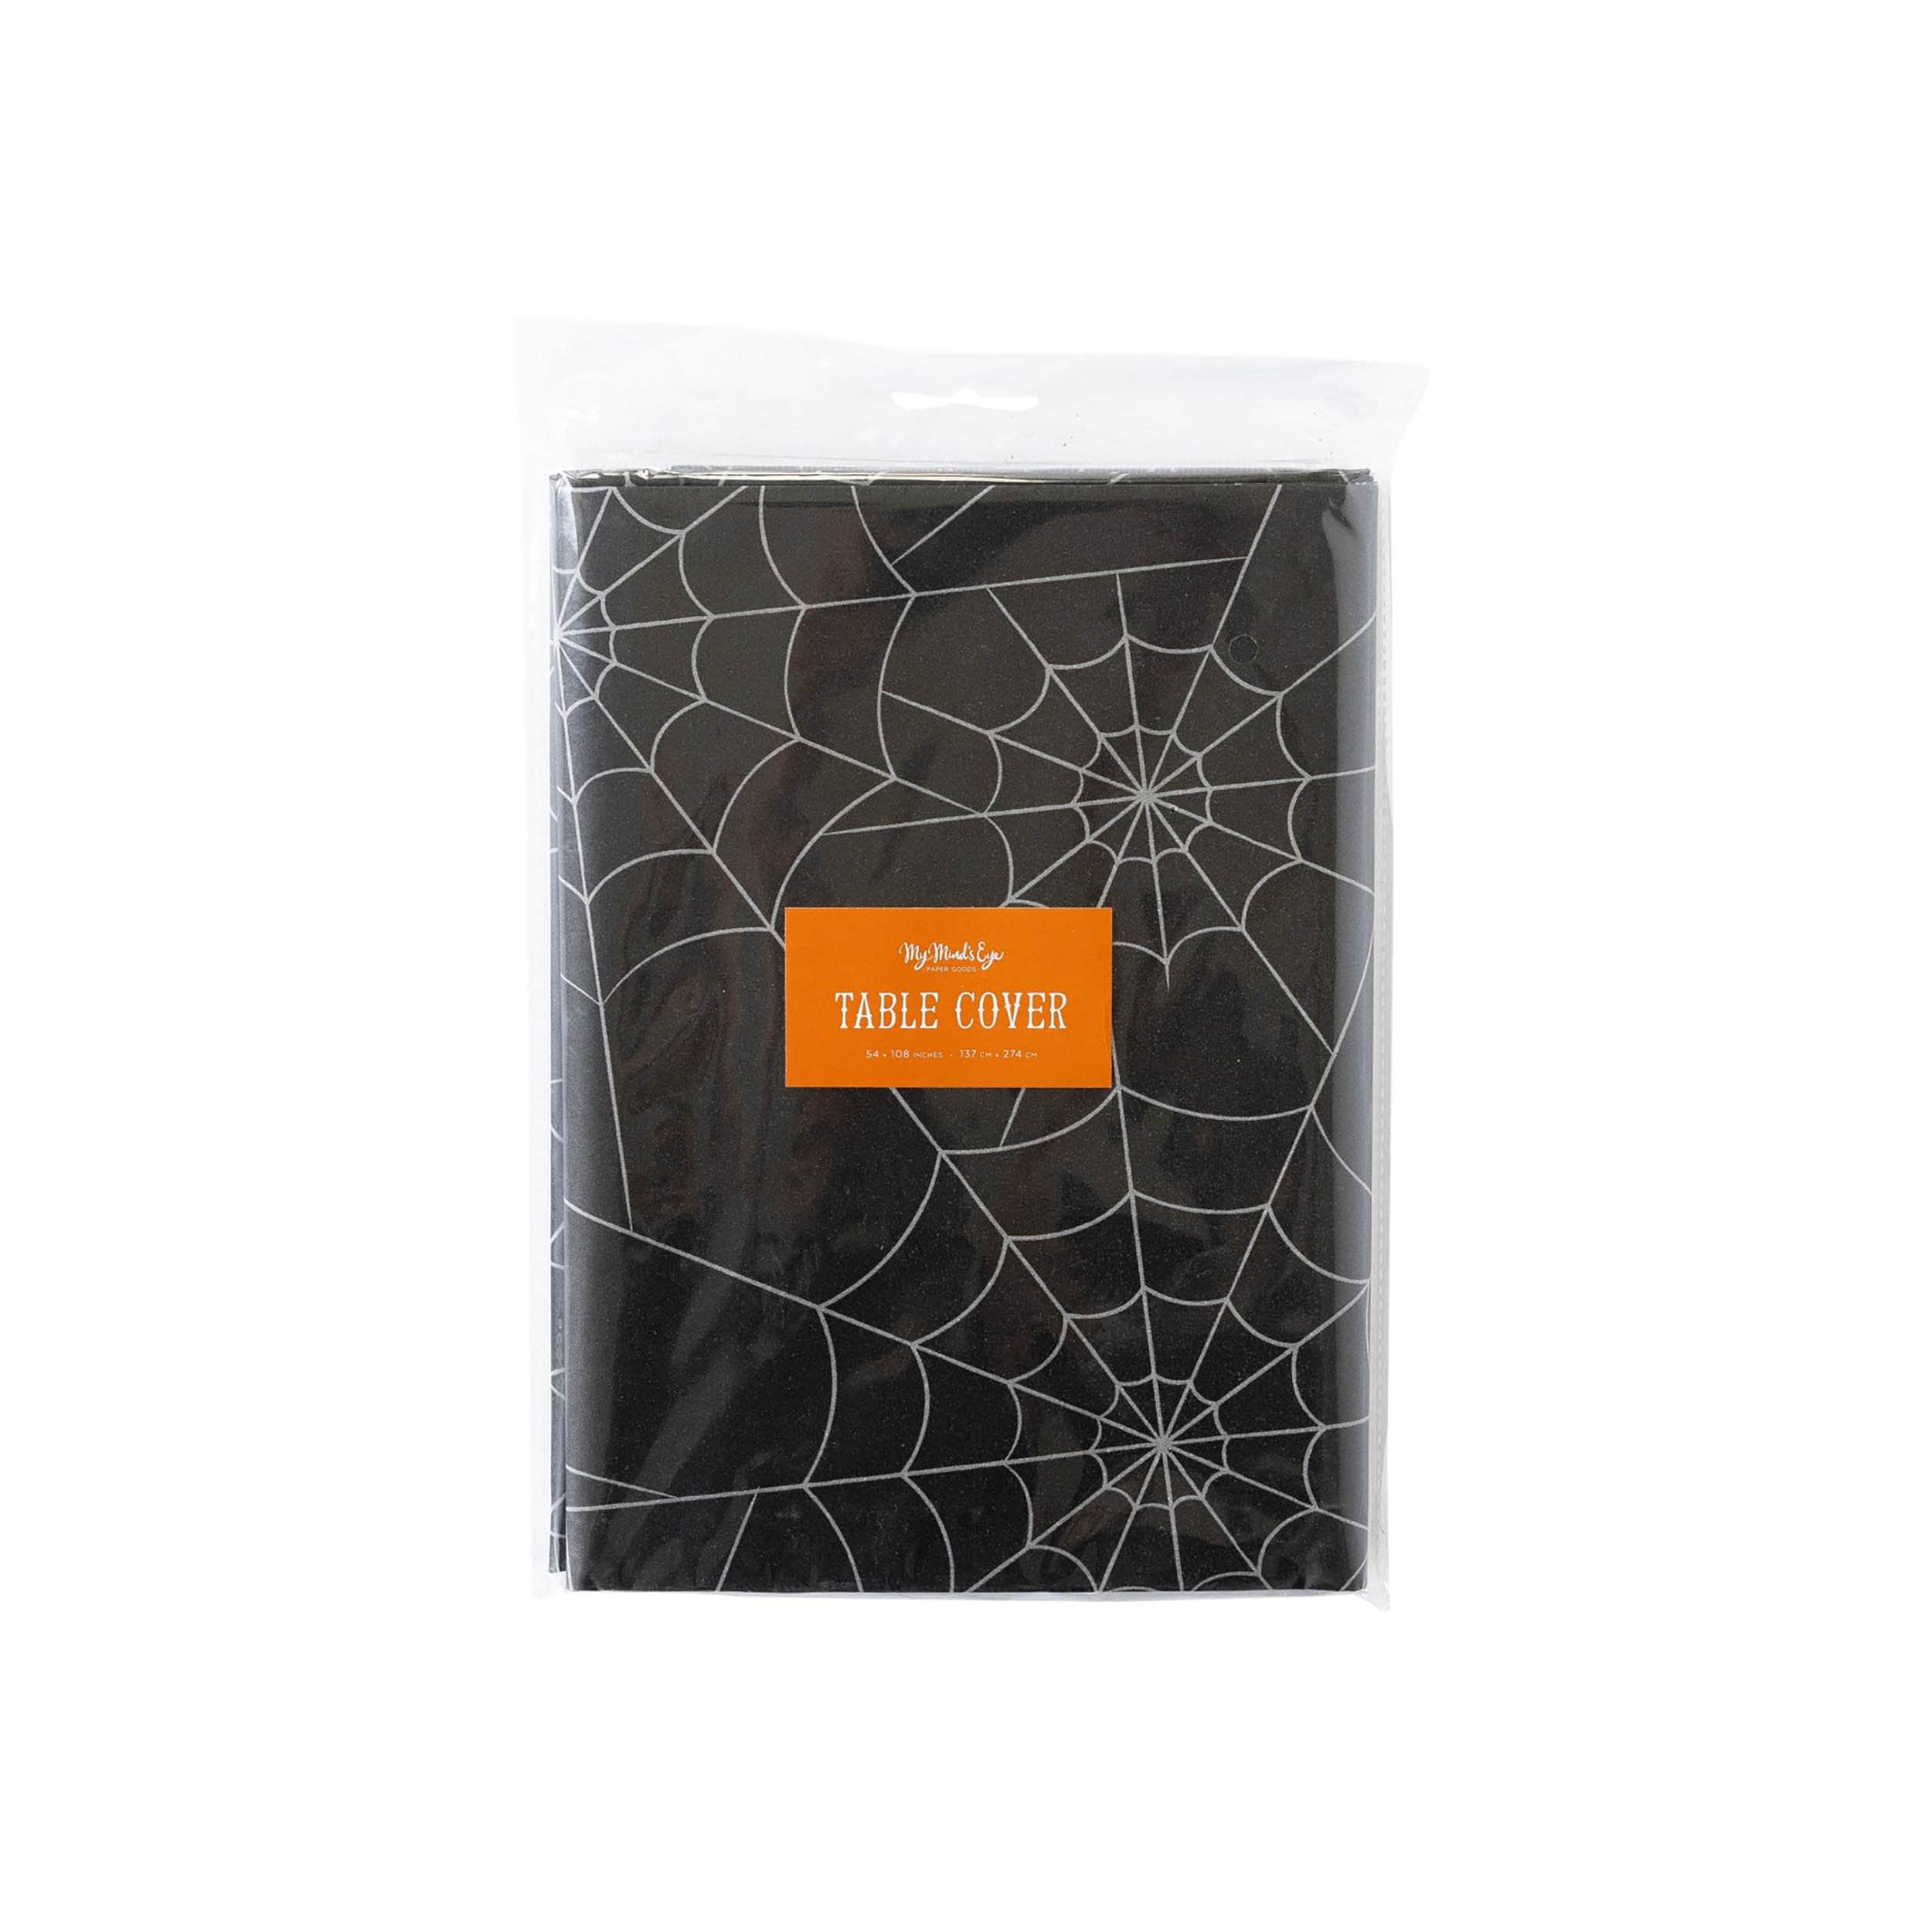 Halloween Table Cover | Spiderweb Table Cover - Disposable Table Cover - Paper Table Cover - Halloween Tablecloth Rectangle, Halloween Table